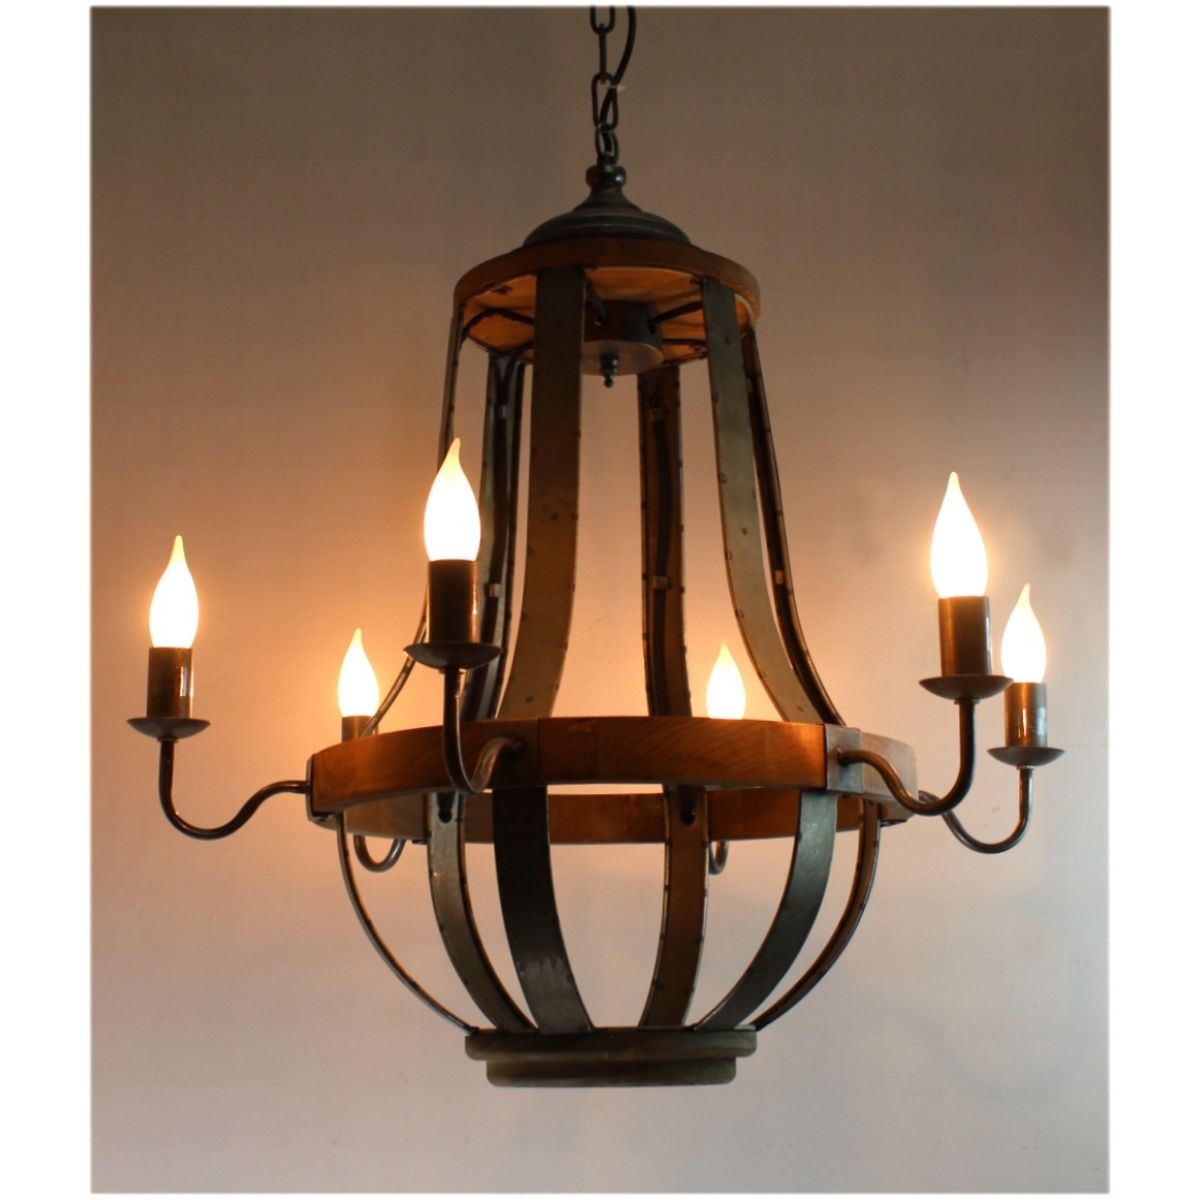 579 Iron Strap And Aged Wood Chandelier French Country Vintage With Vintage Style Chandelier (View 12 of 12)